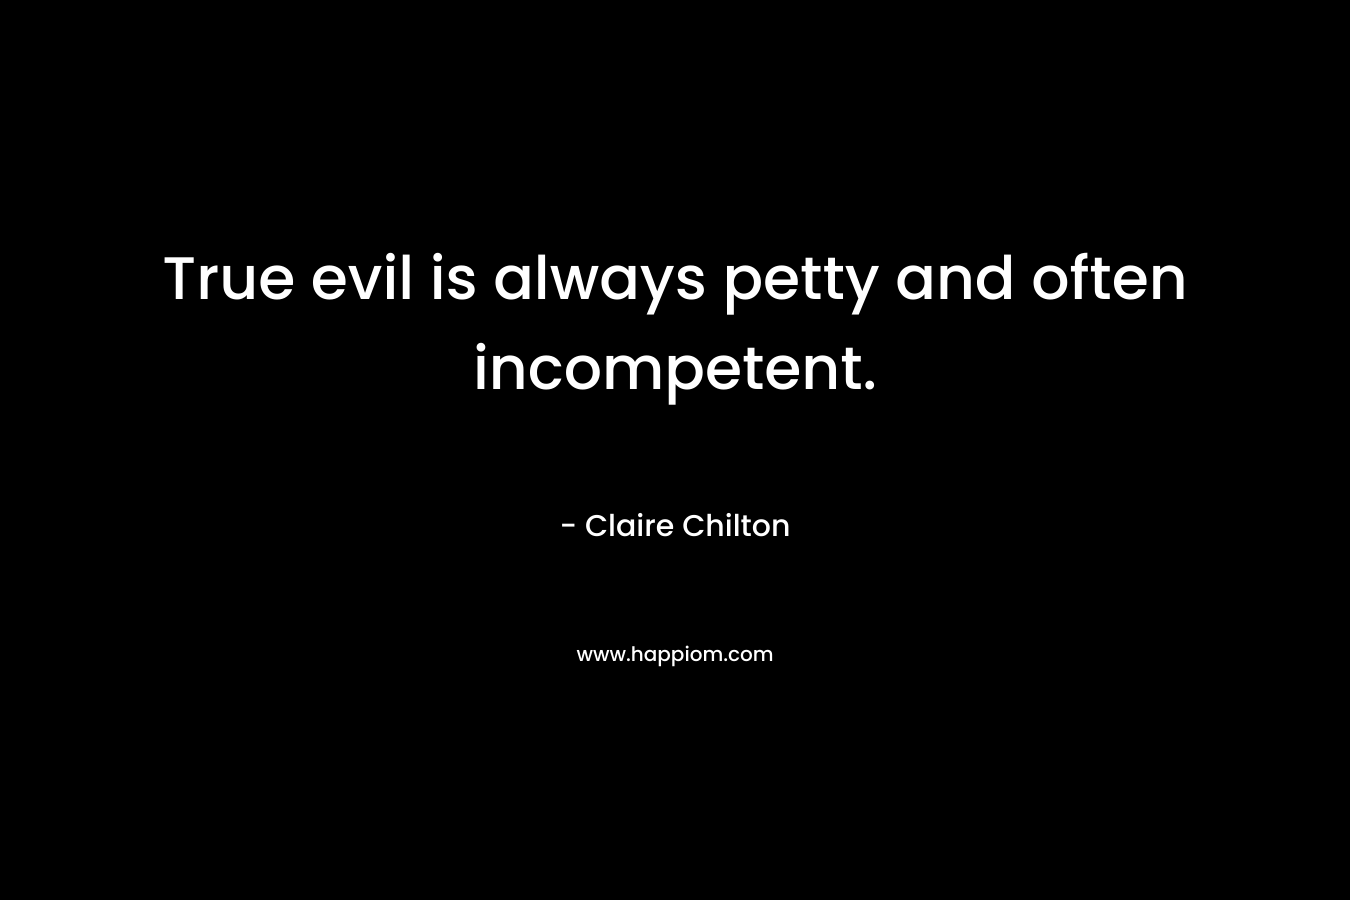 True evil is always petty and often incompetent.